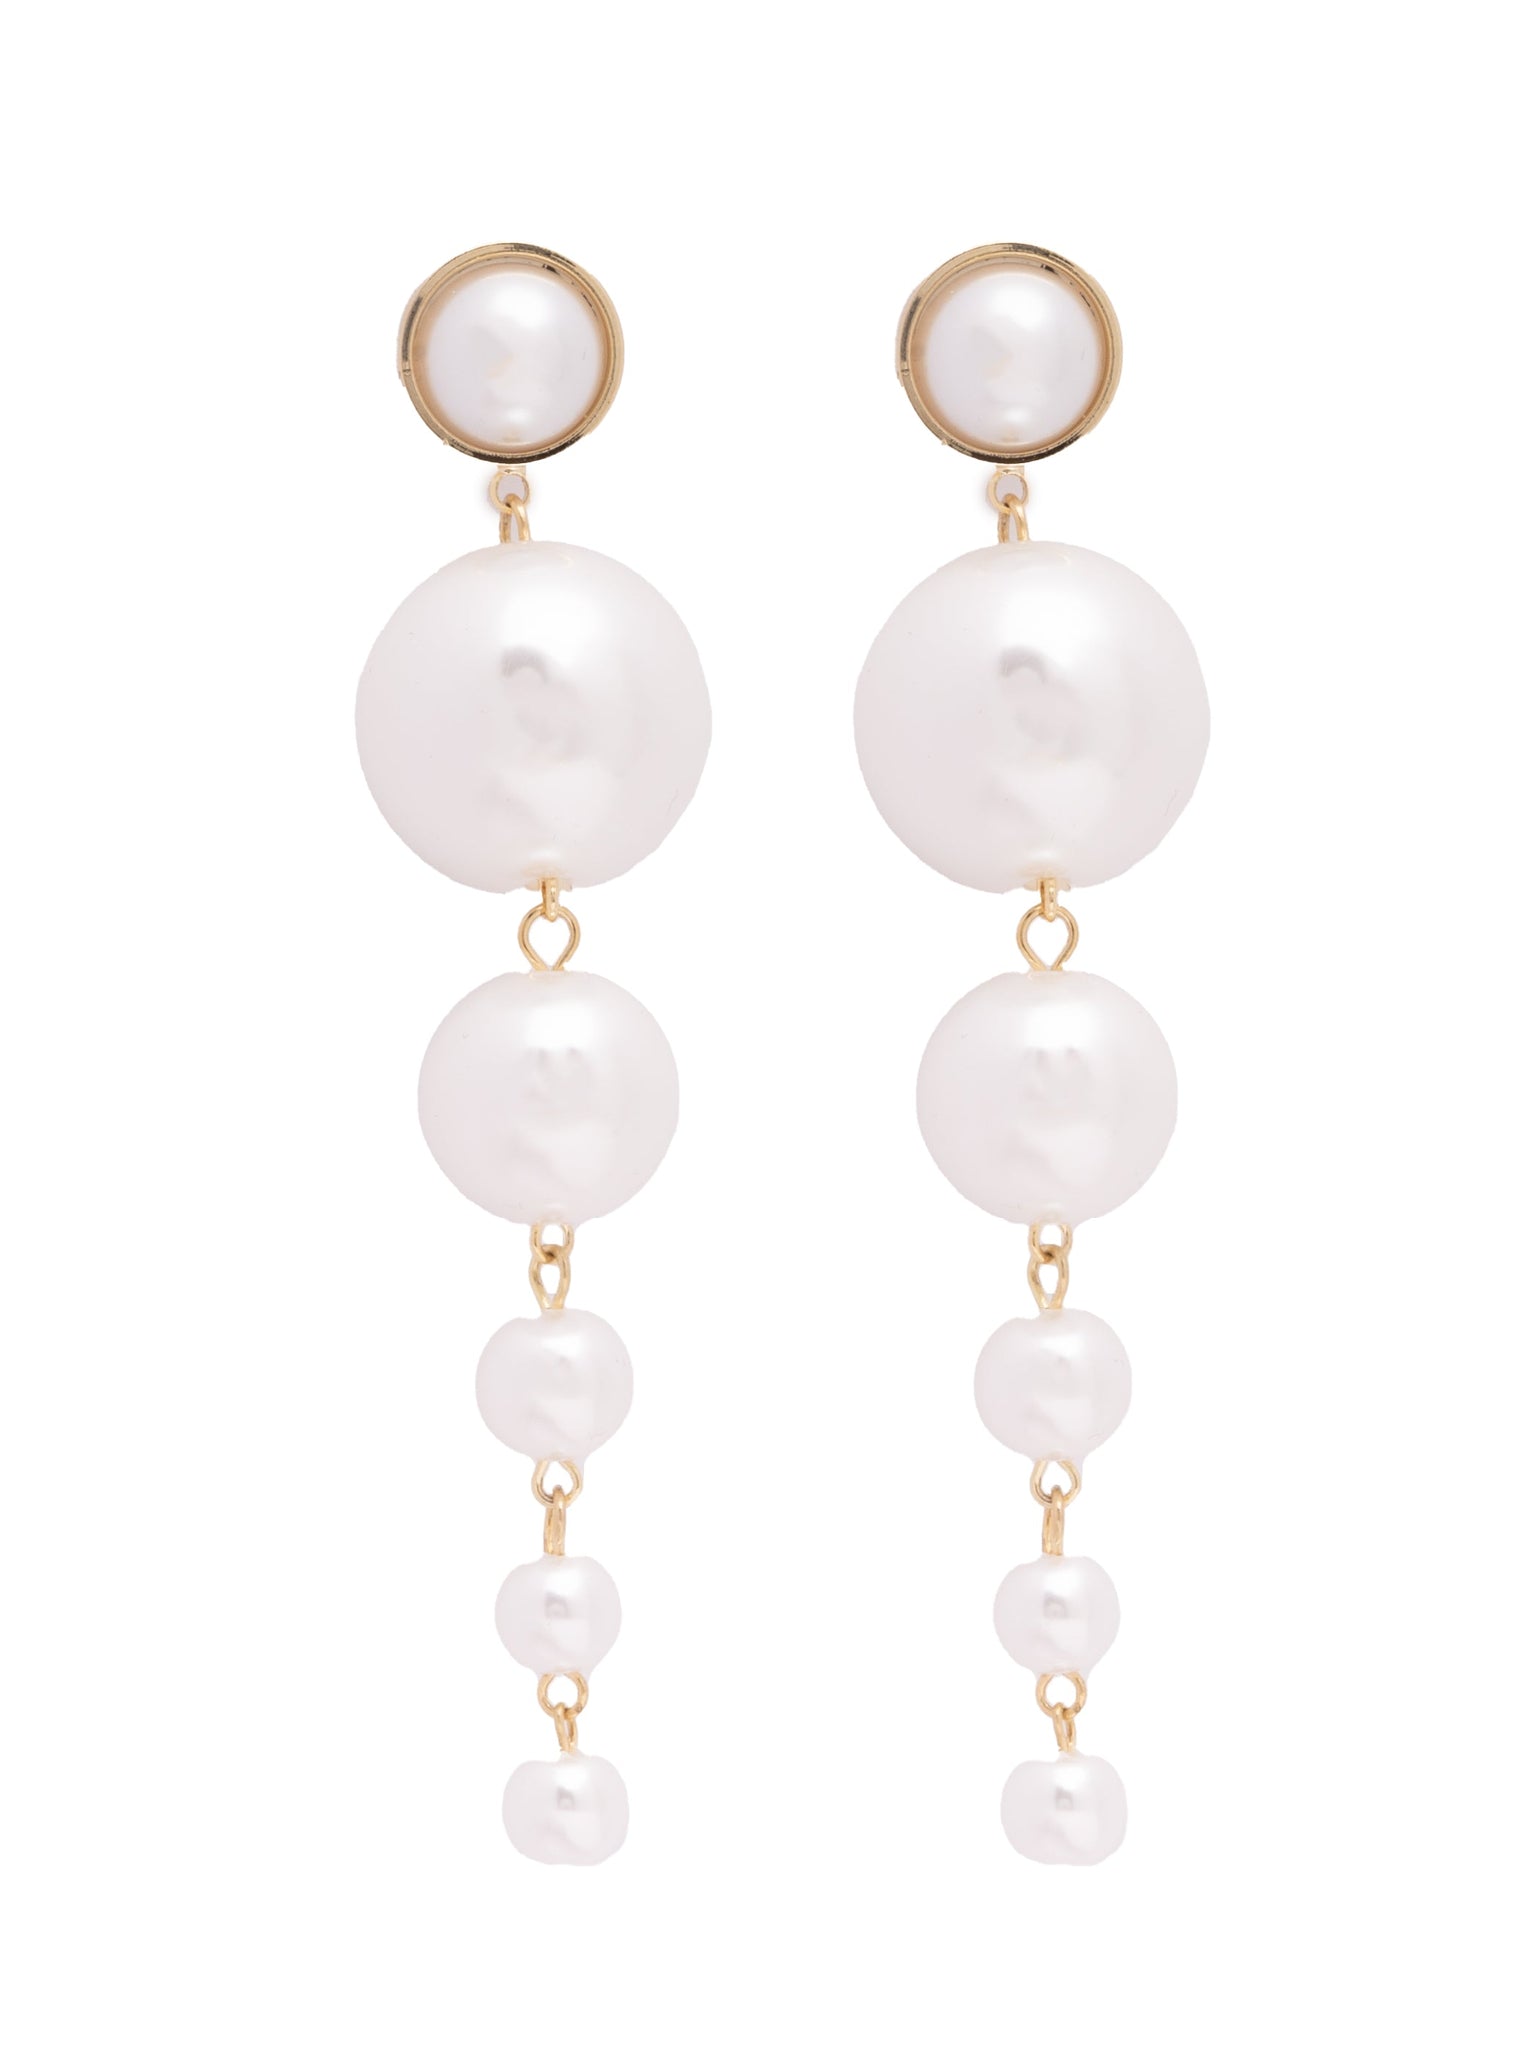 The Pearl Story - Pearly White Shoulder Duster Earrings 